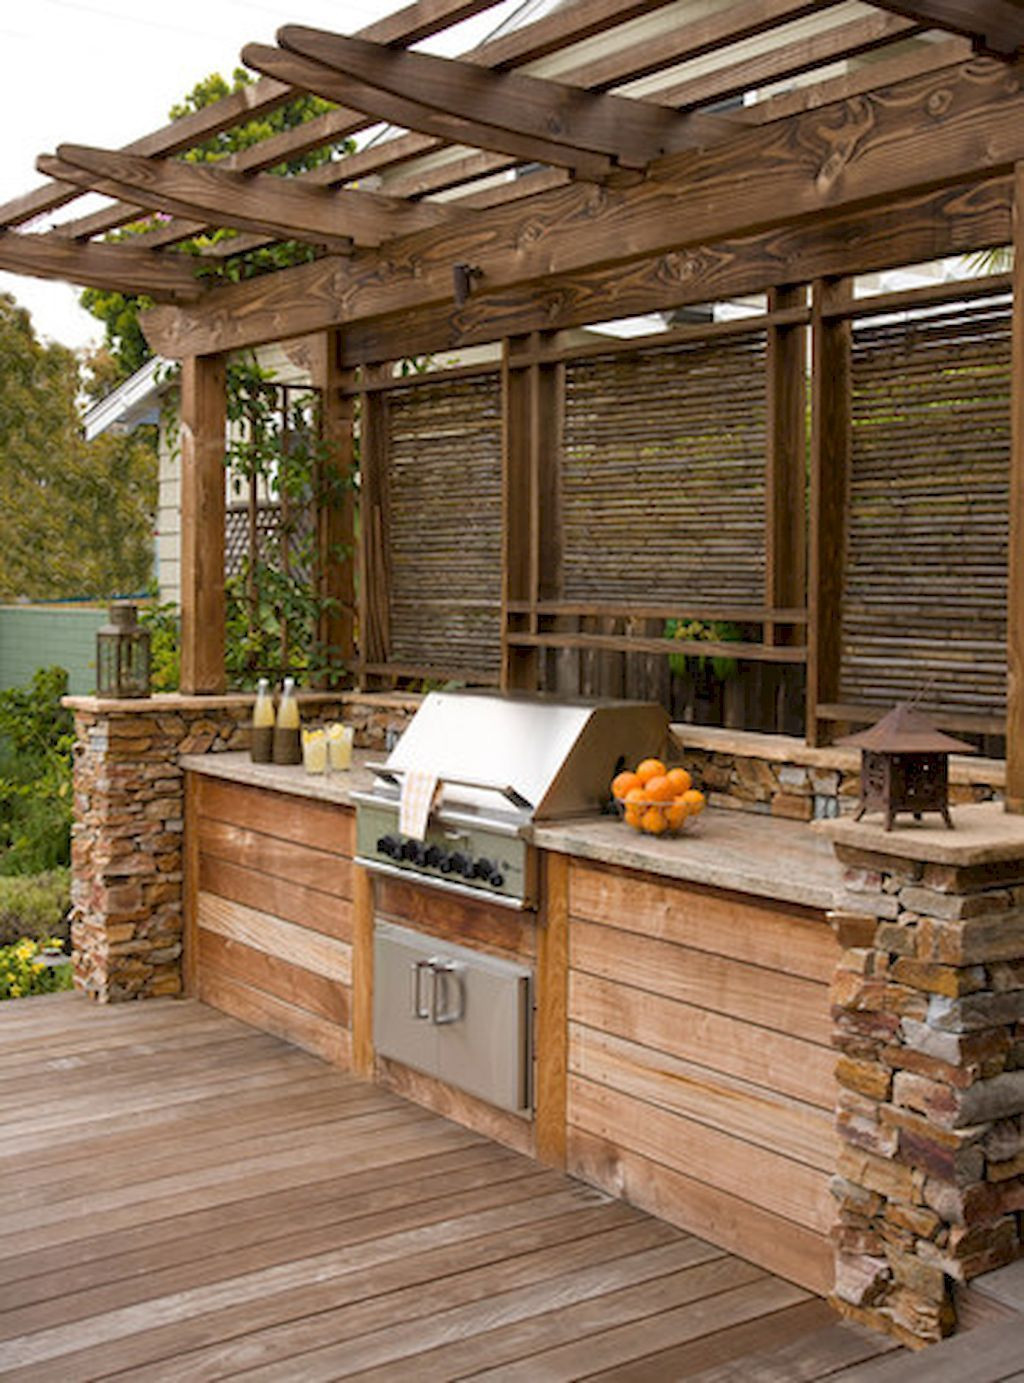 DIY Outdoor Kitchens On A Budget
 rustic Outdoor Kitchen on a bud backyards patio ideas